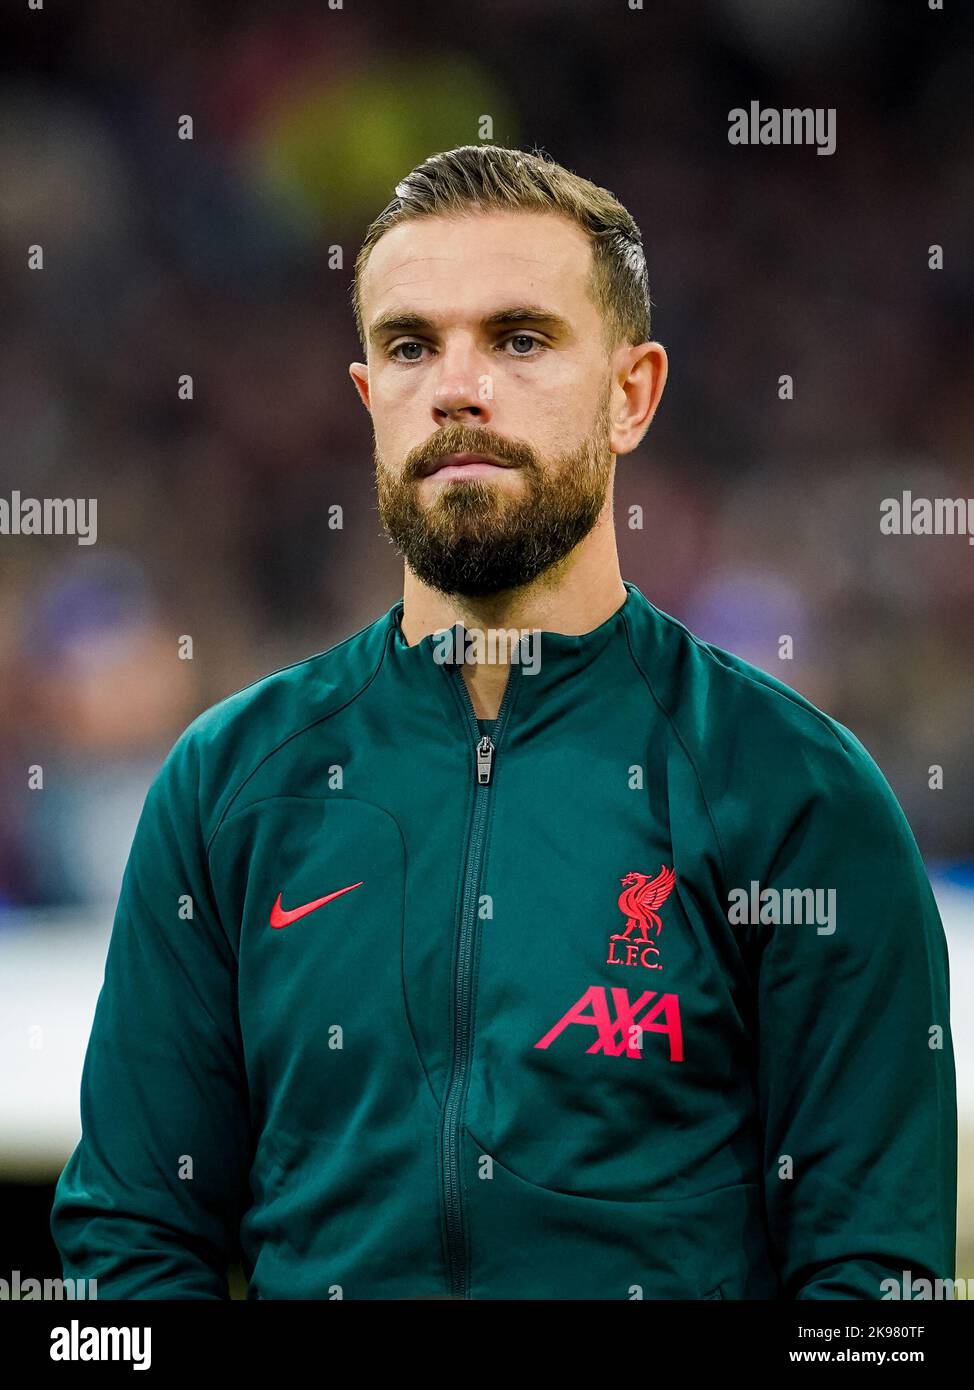 AMSTERDAM, NETHERLANDS - OCTOBER 26: Jordan Henderson of Liverpool FC during the Group A - UEFA Champions League match between Ajax and Liverpool FC at the Johan Cruijff ArenA on October 26, 2022 in Amsterdam, Netherlands (Photo by Andre Weening/Orange Pictures) Stock Photo